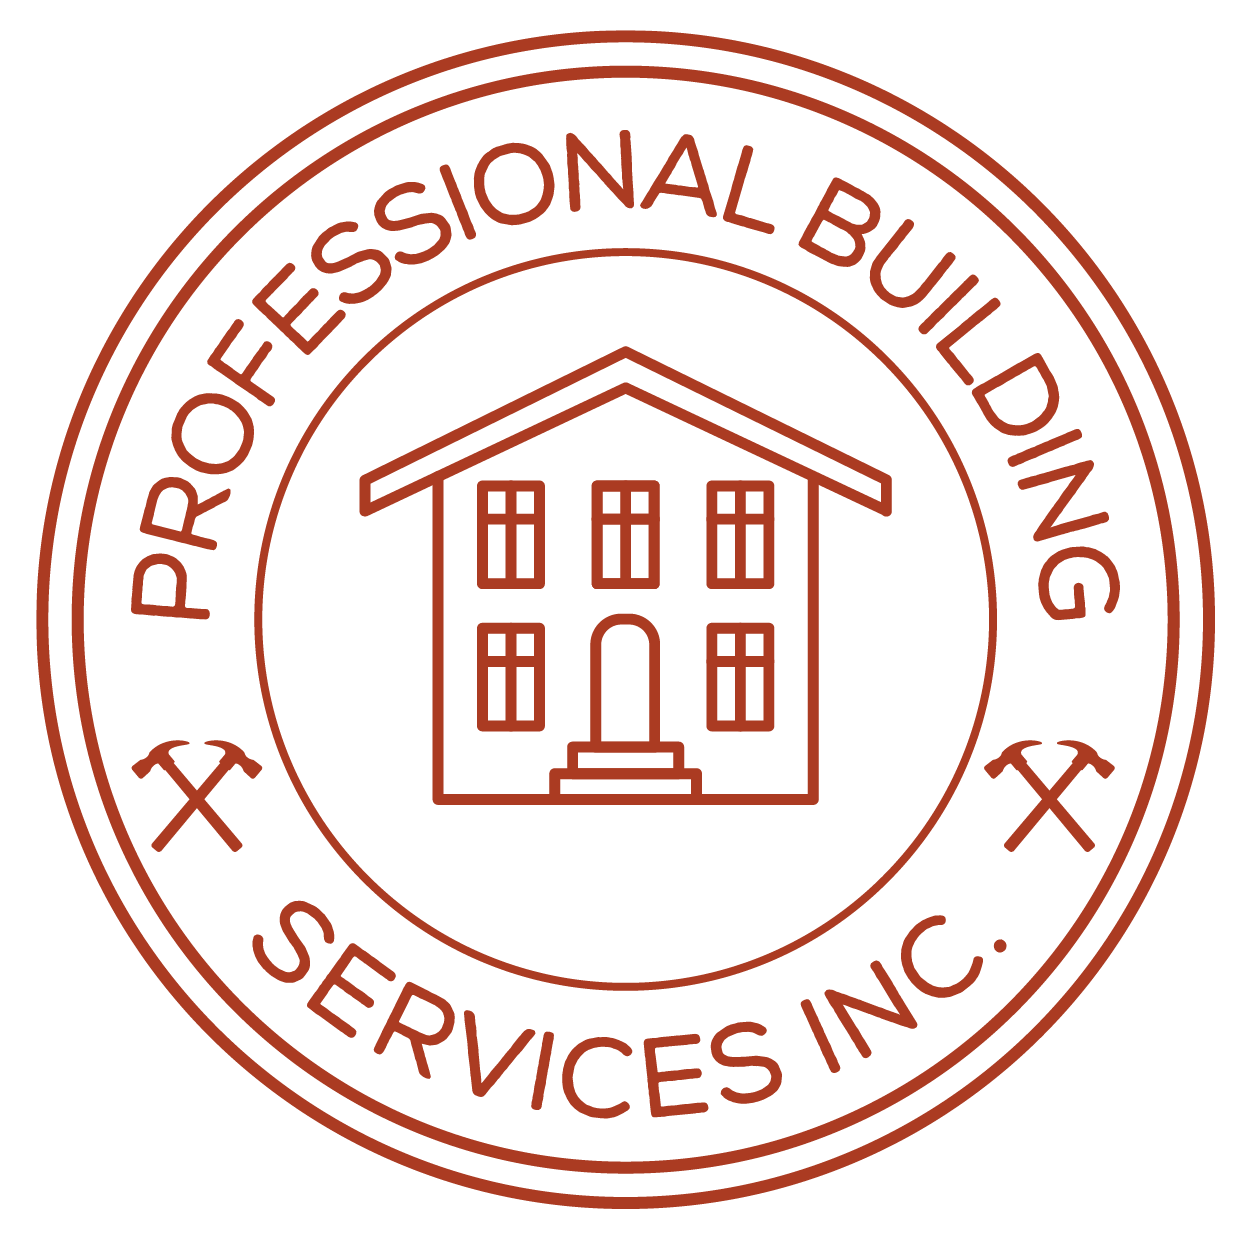 Professional Building Services Co.